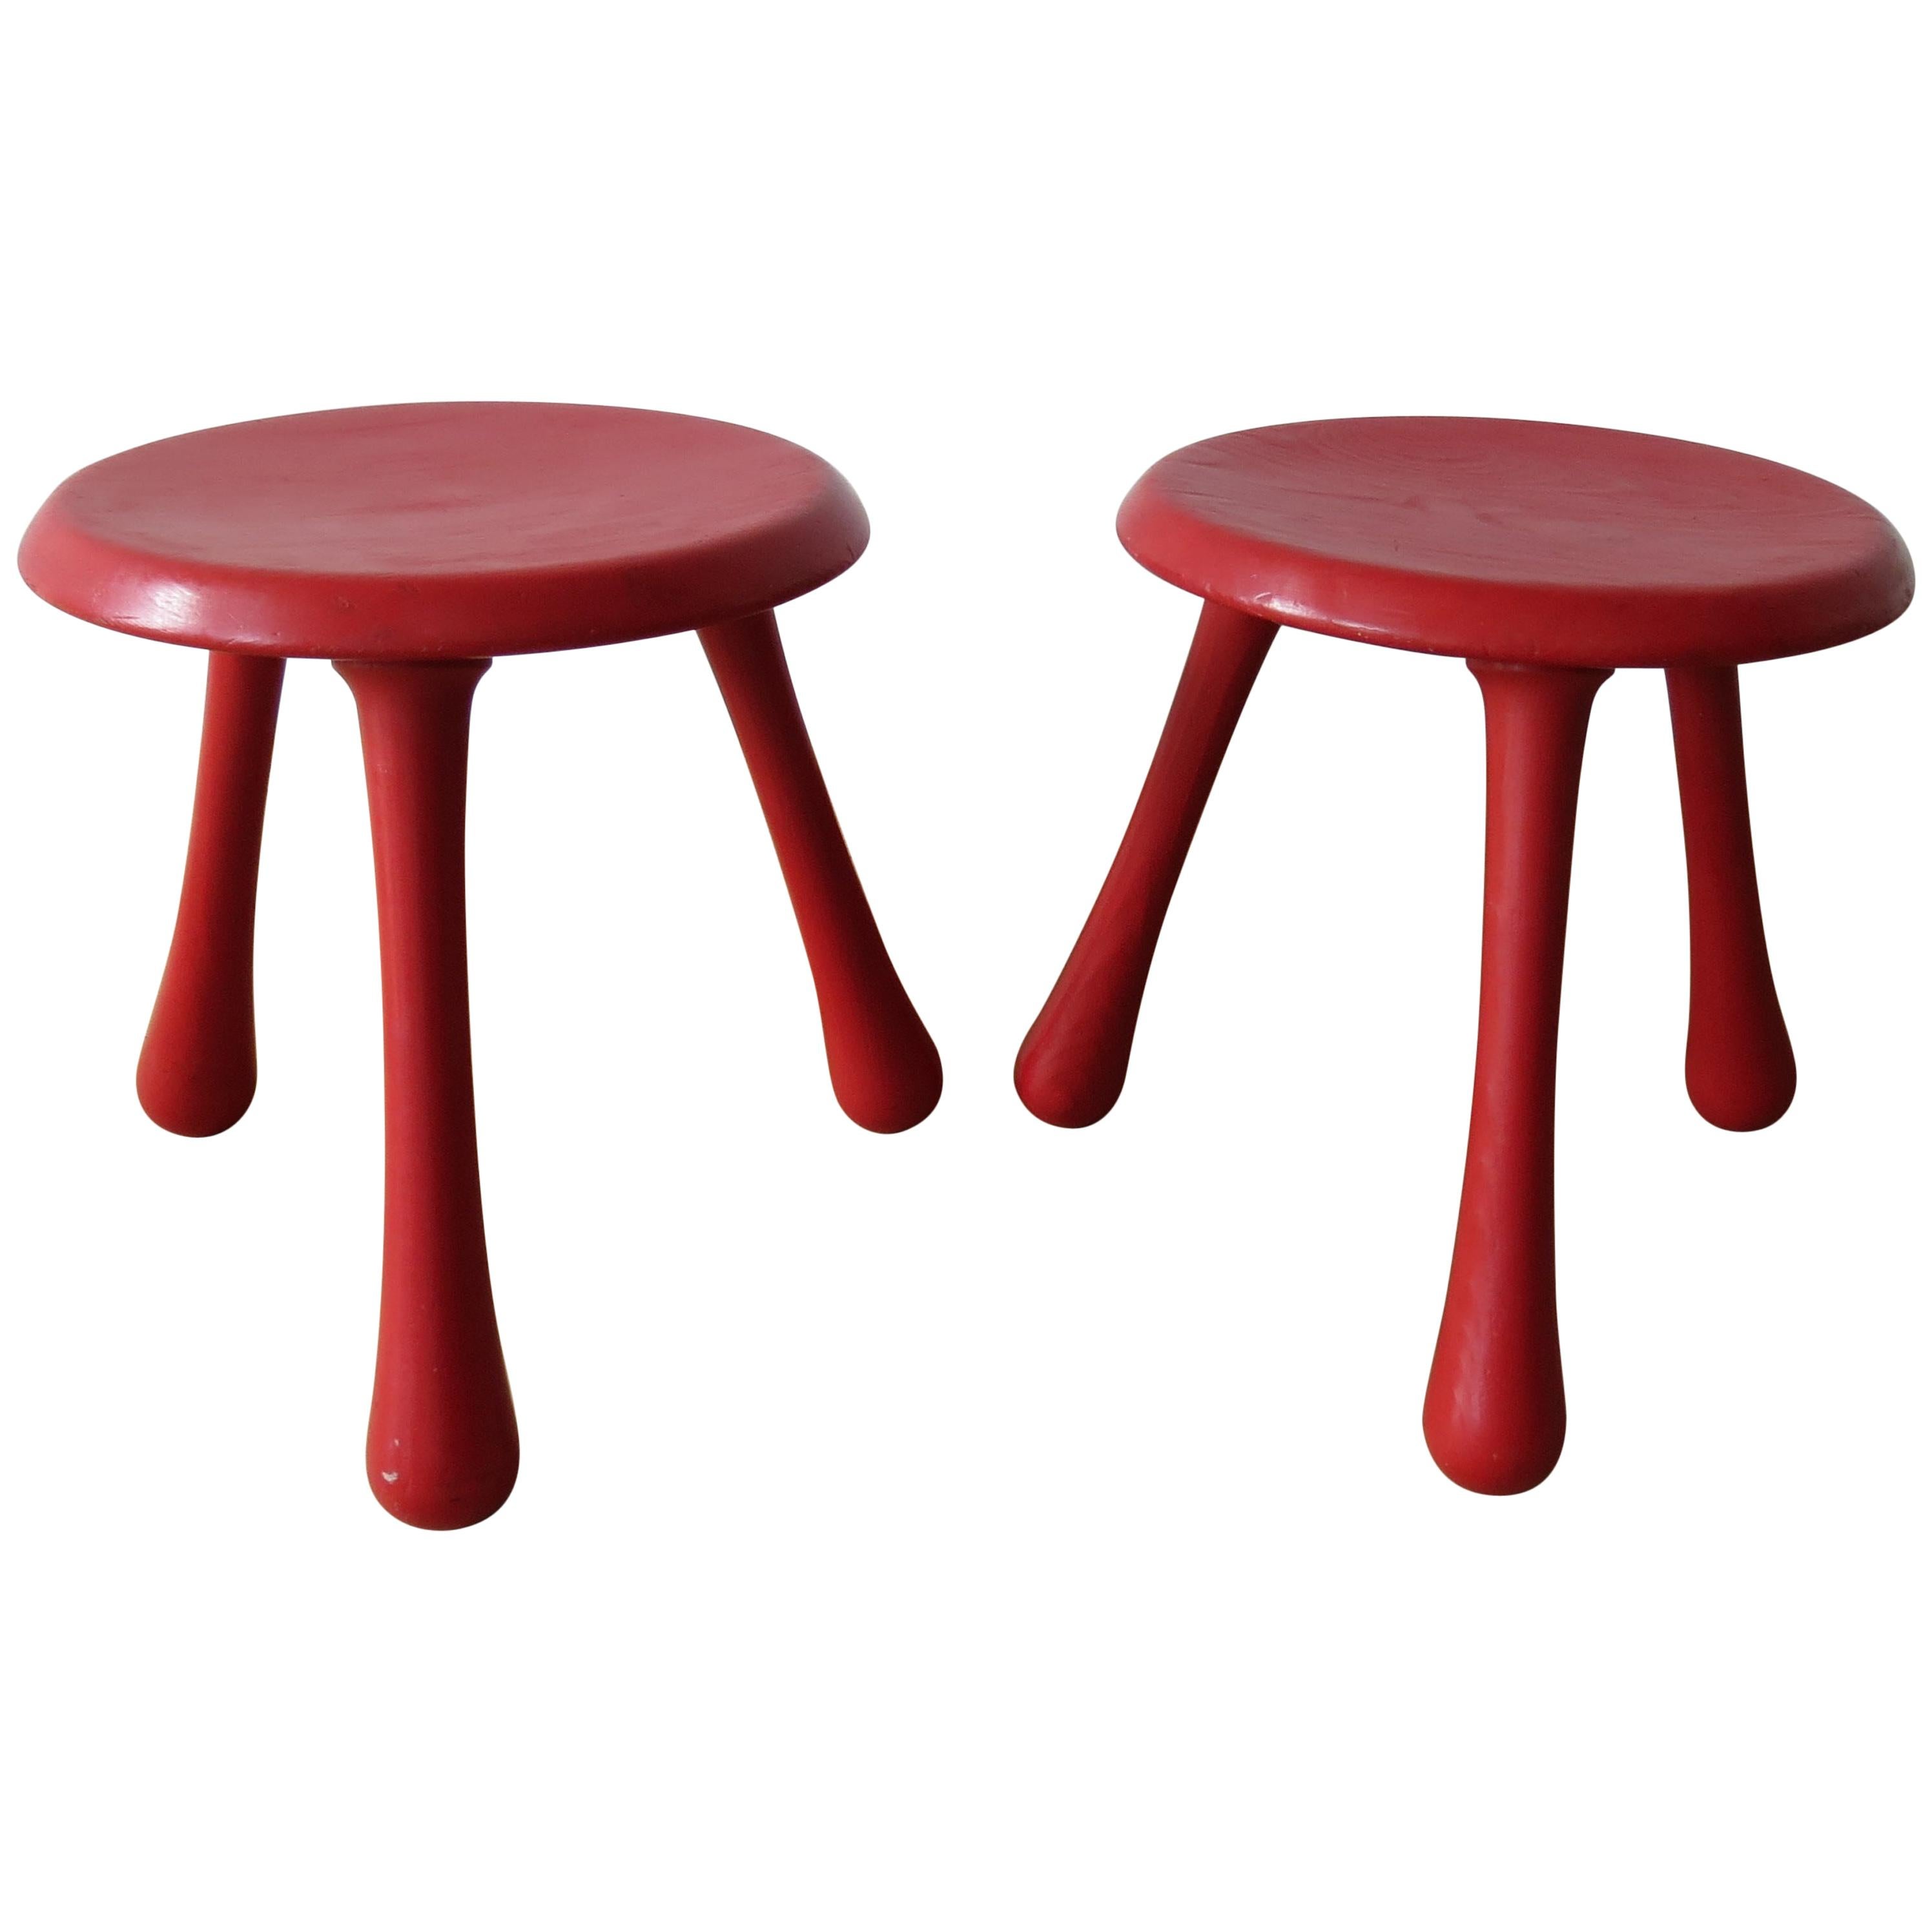 Pair of red stools, designed by Ingvar Kamprad and produced by Habitat. Designed in 2004, this pair of stools are in good vintage condition with some signs of wear to the finish. 

Each leg is removable by unscrewing from the top. 




 